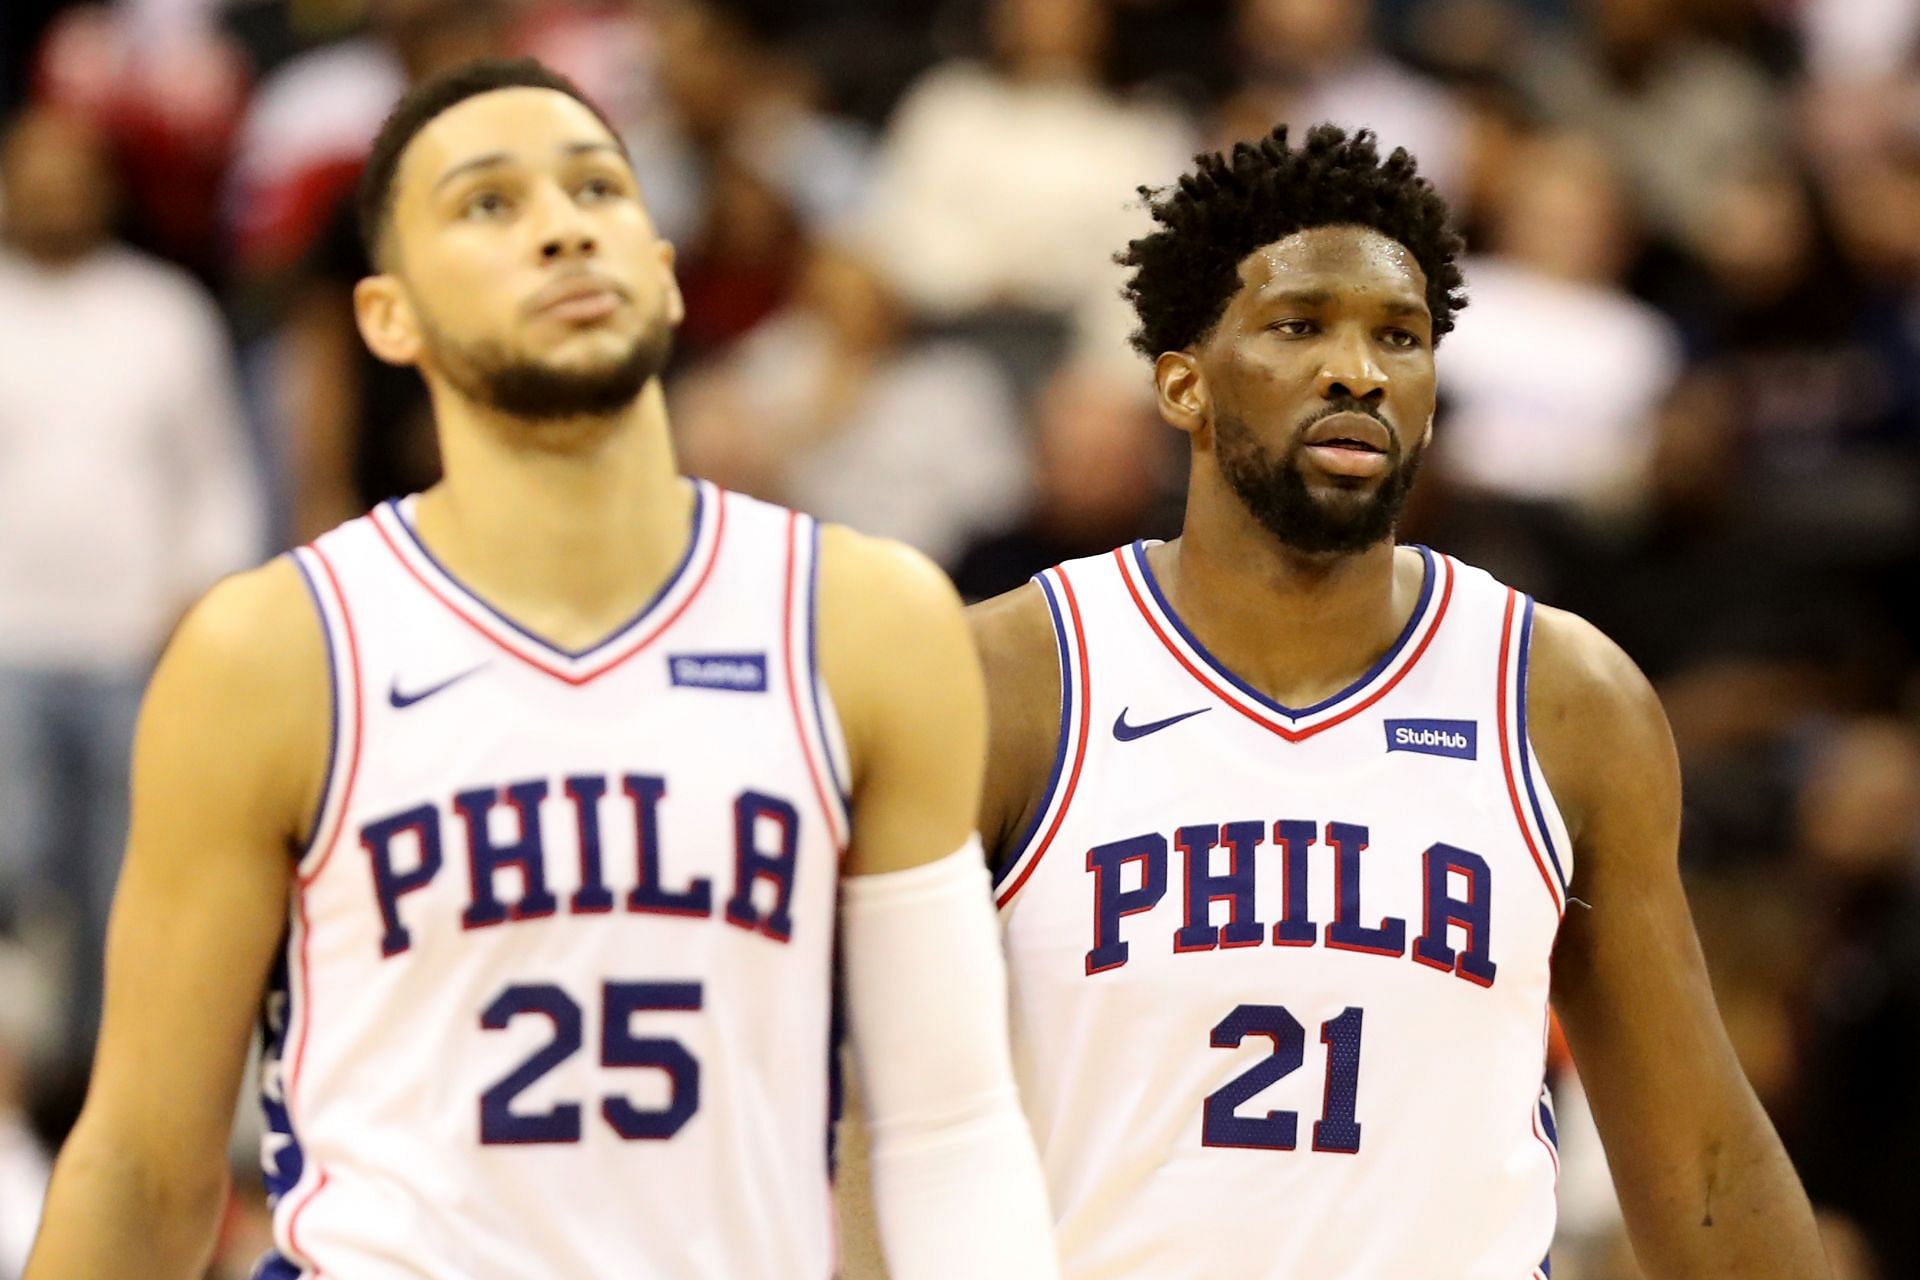 Should the Philadelphia 76ers have protected Ben Simmons? Shaq says no.